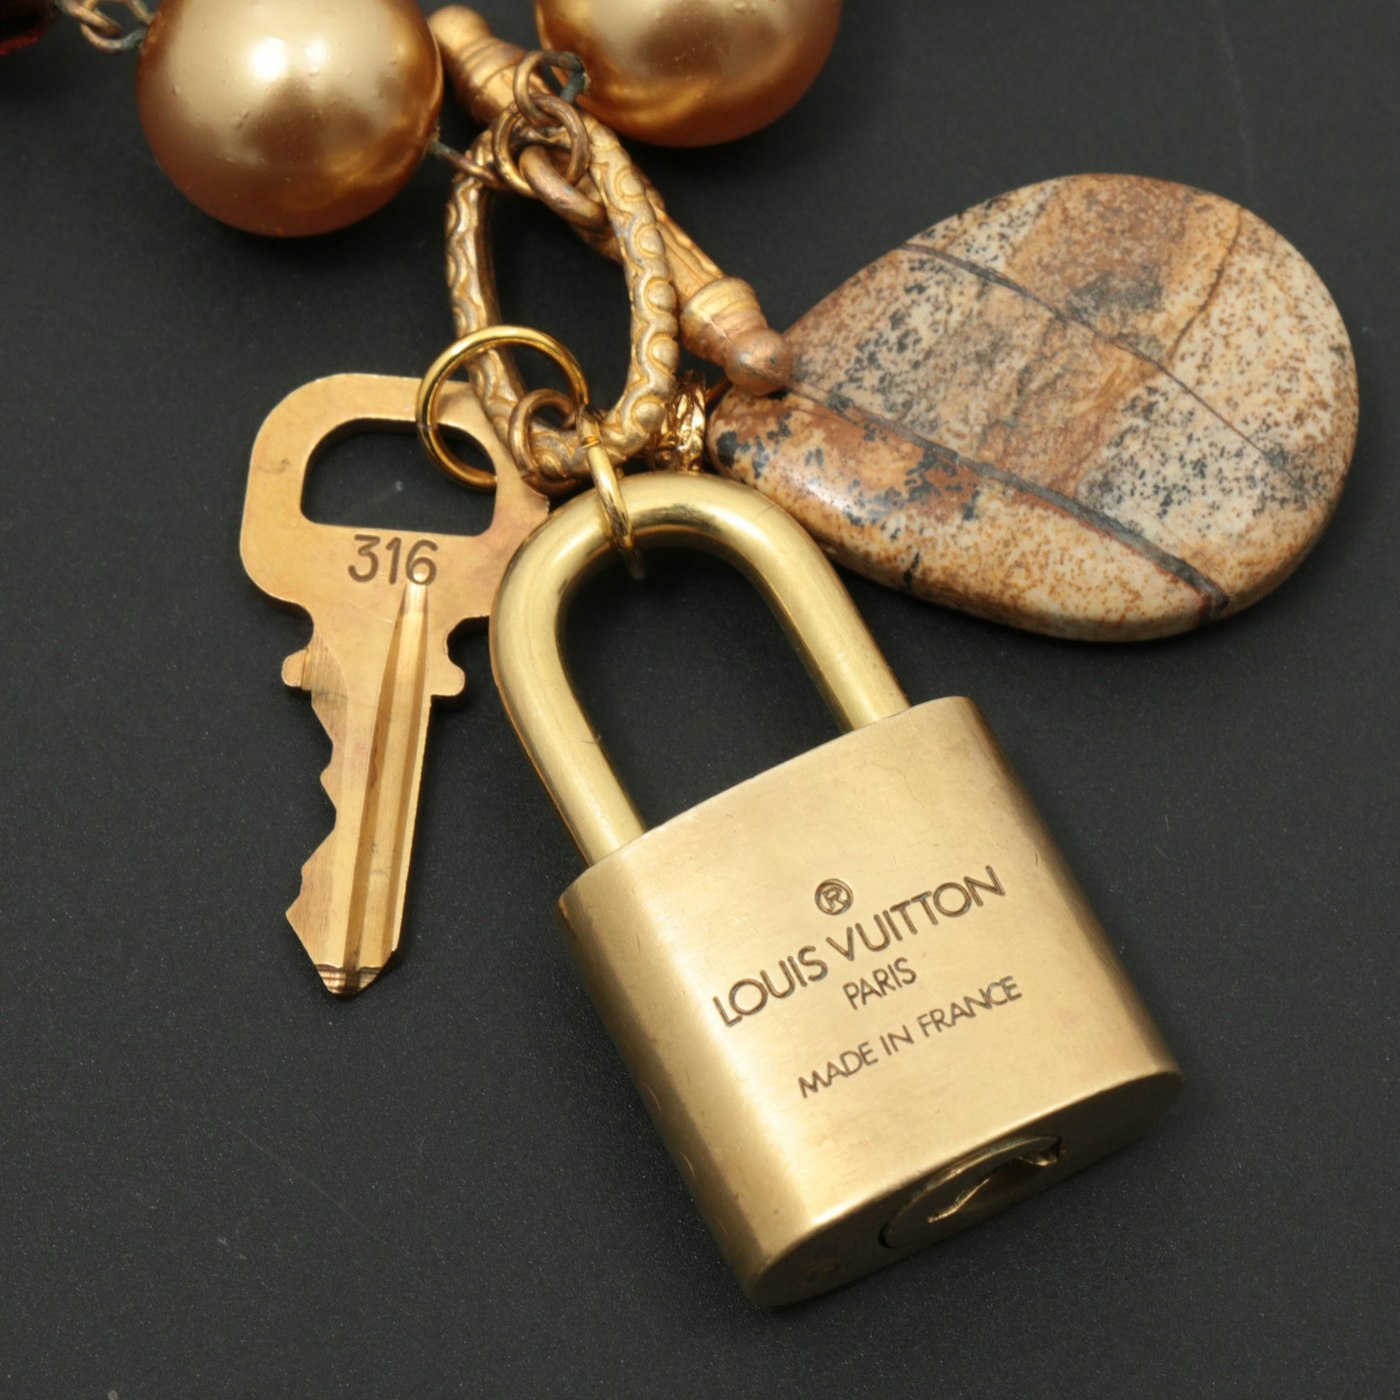 Louis Vuitton Padlock Necklace - 4 For Sale on 1stDibs